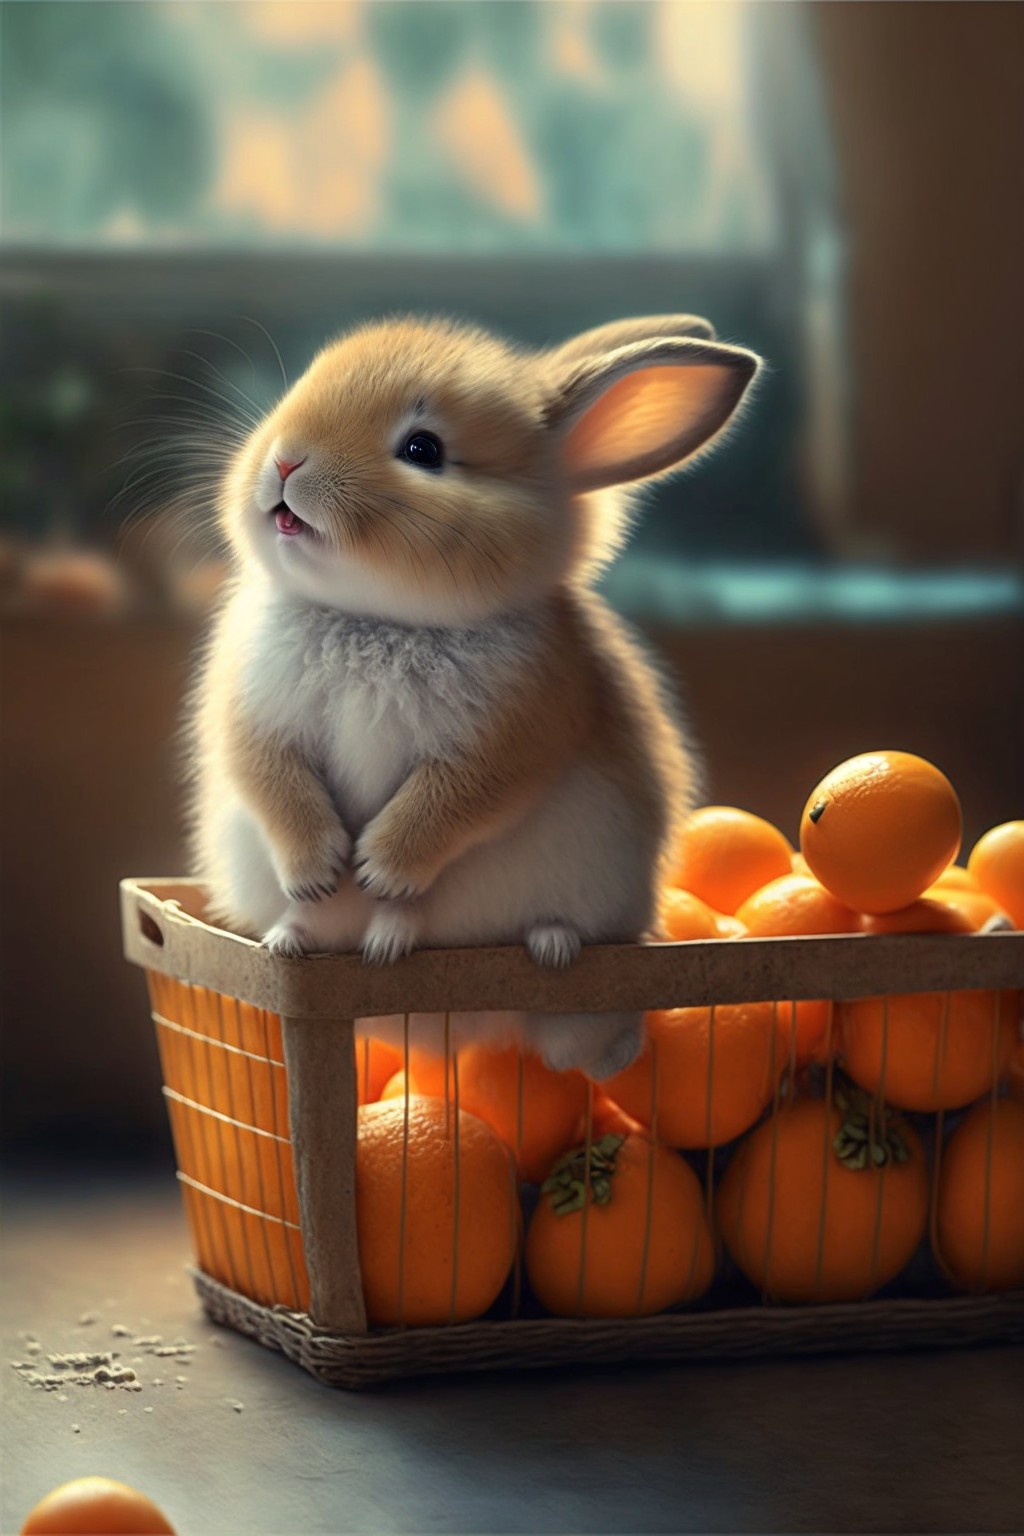 Rabbit mother prepares 1,000 catties of oranges and waits for her child to come home